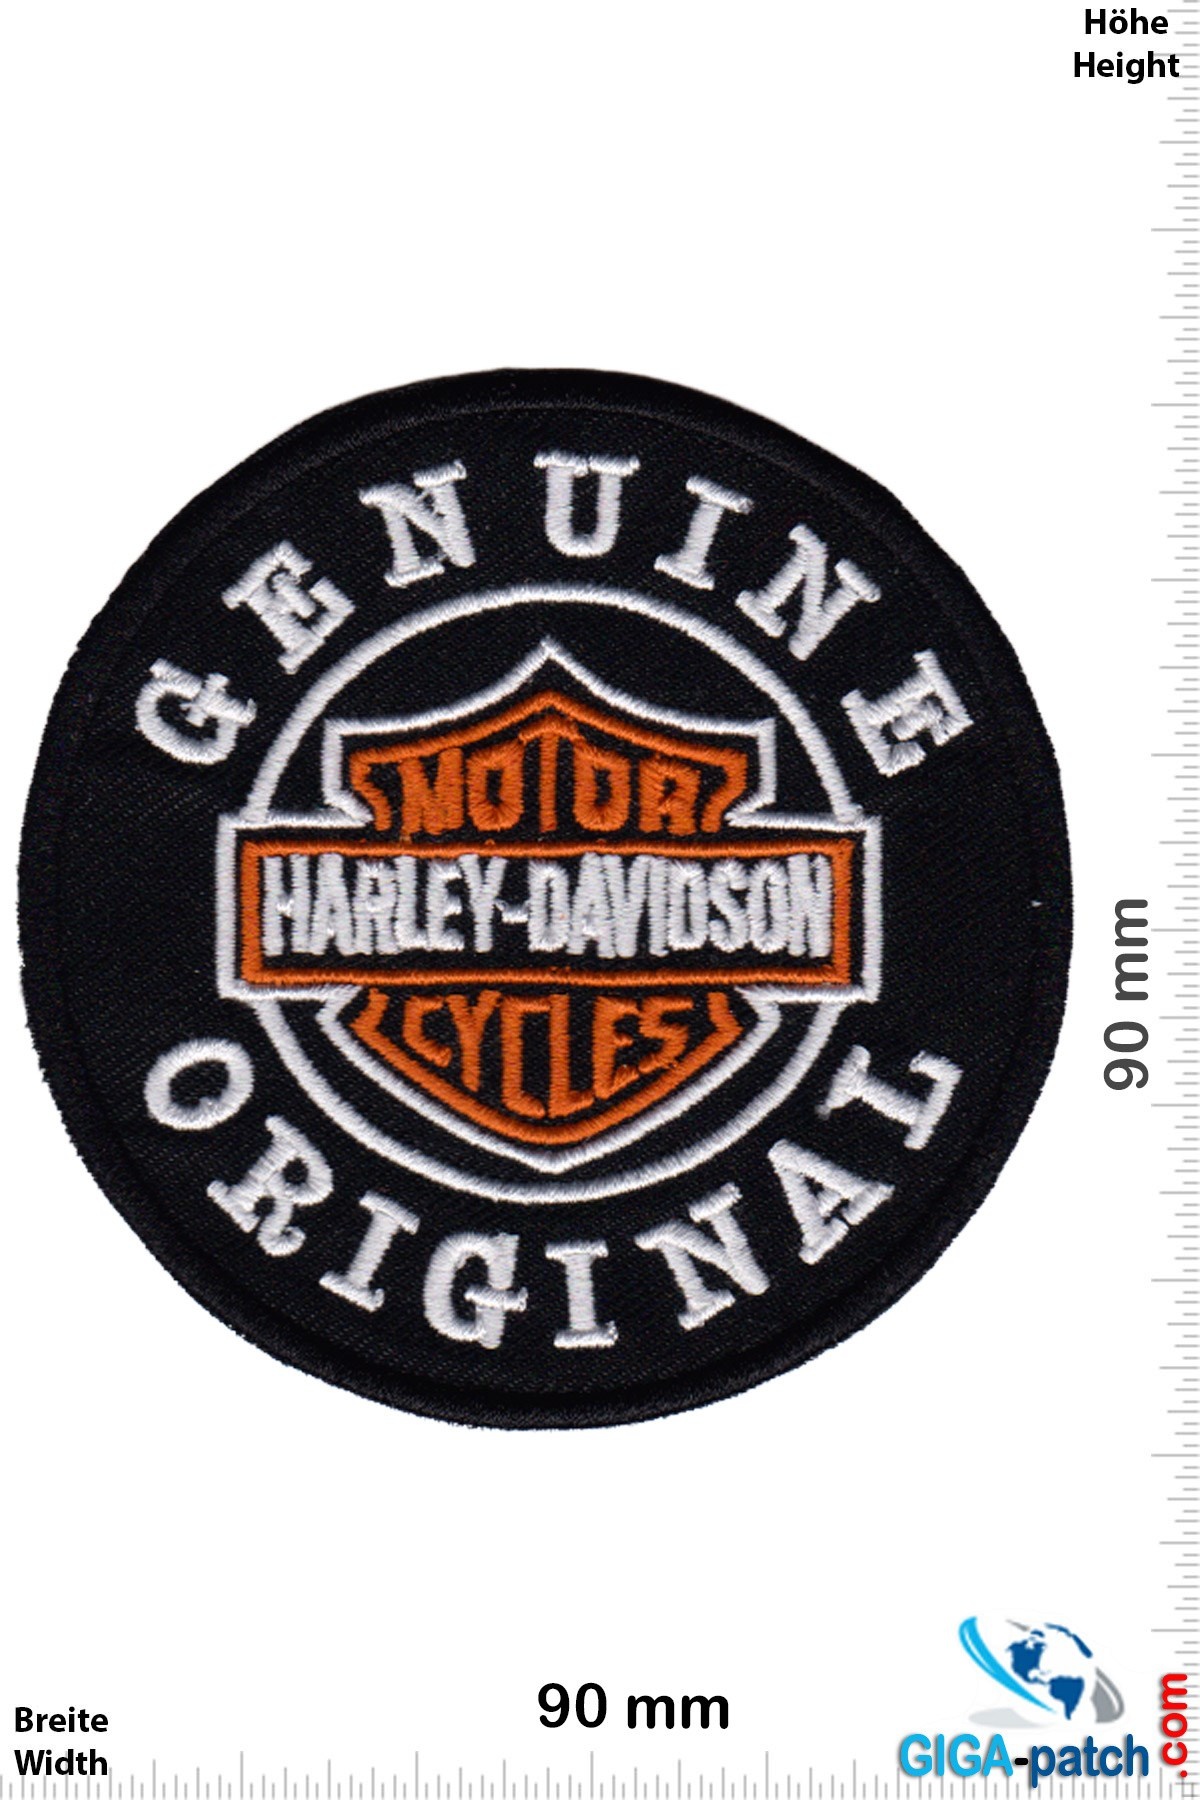 Harley Davidson -Patch - Iron On - Patch Keychains Stickers - giga